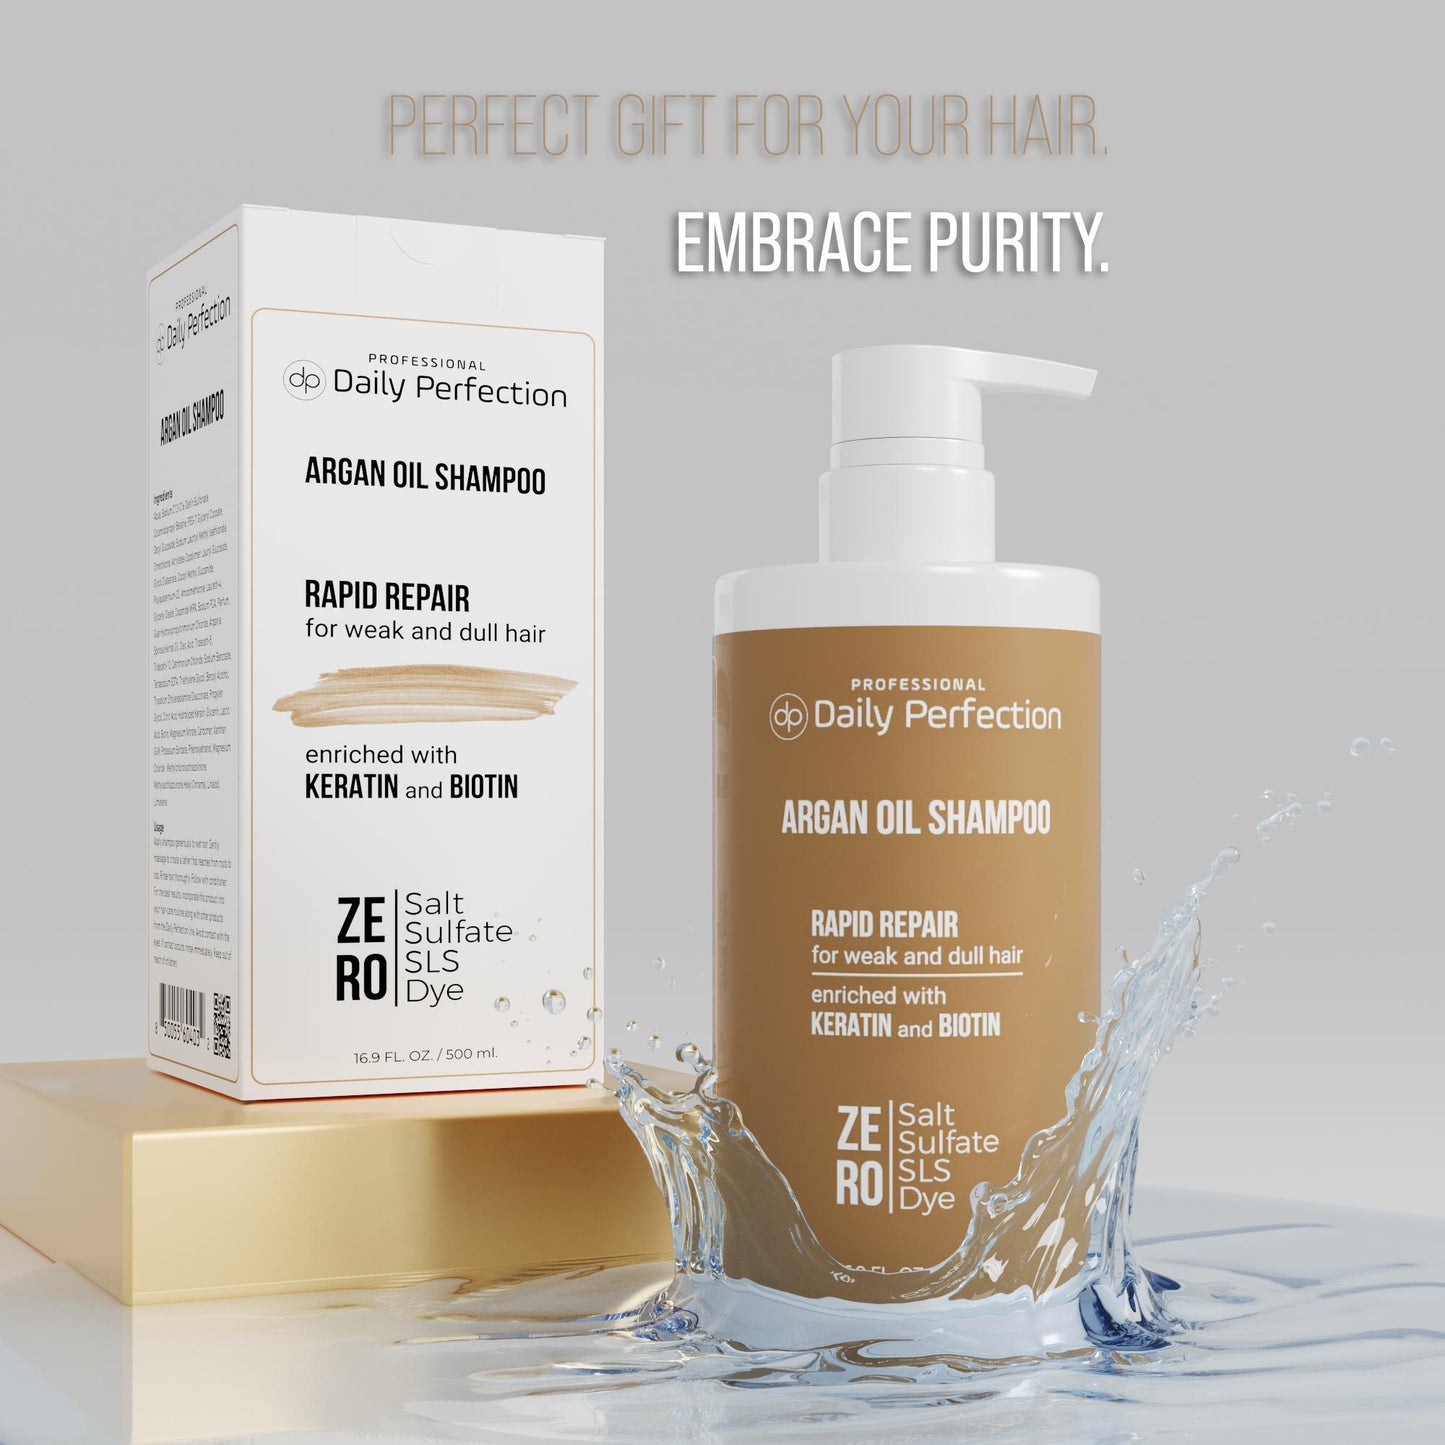 Daily Perfection Argan Oil Shampoo product bottle and the box in water splash with a slogan that reads embrace purity